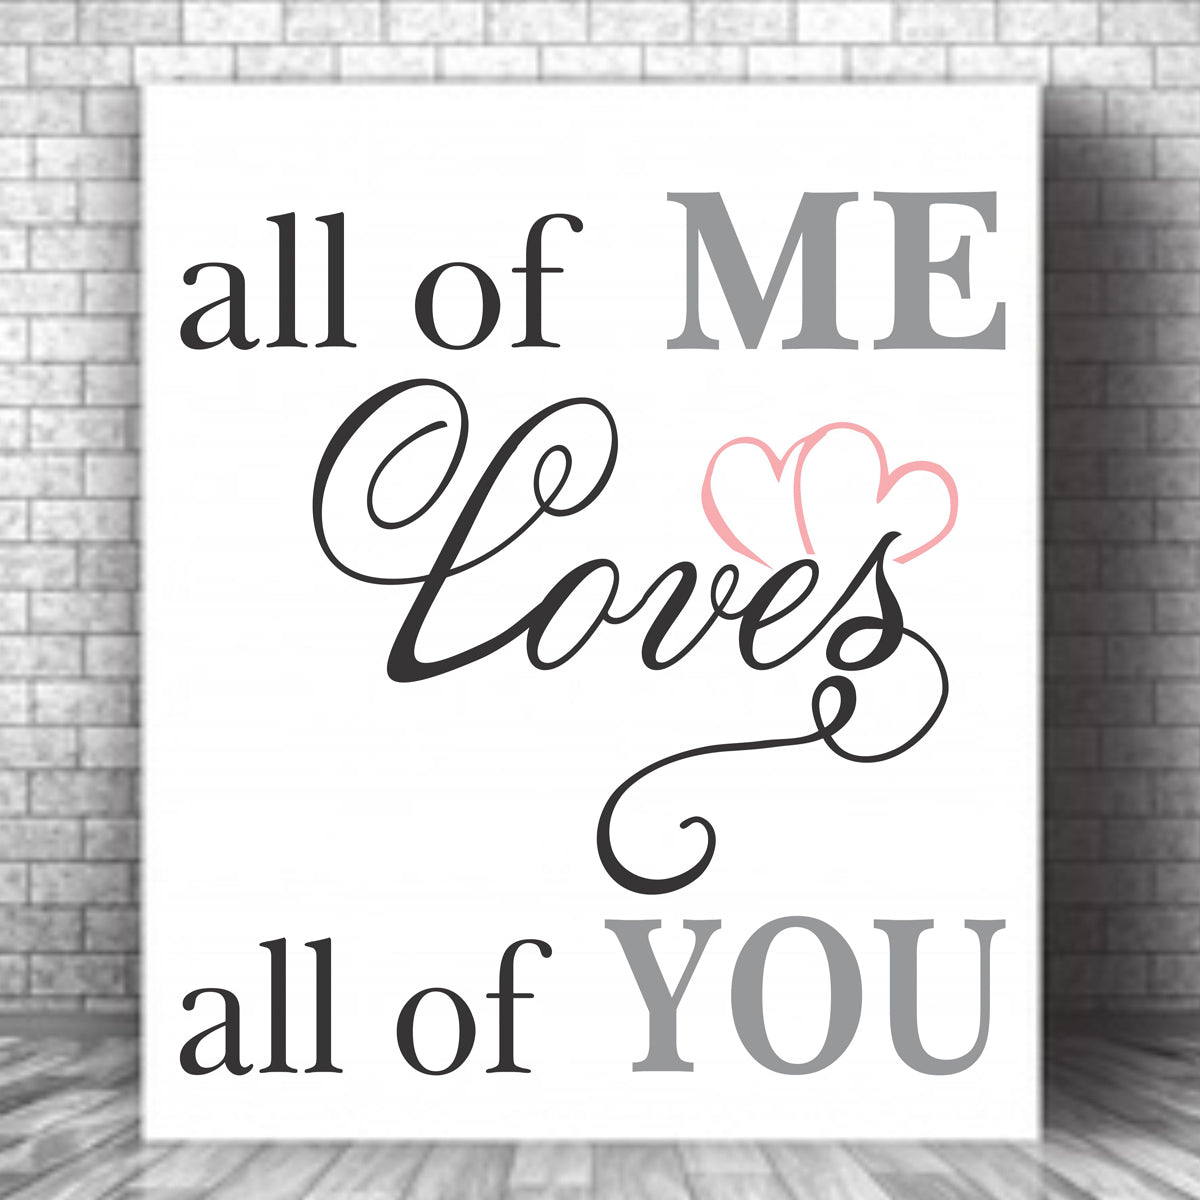 All of Me loves all of You Stencil